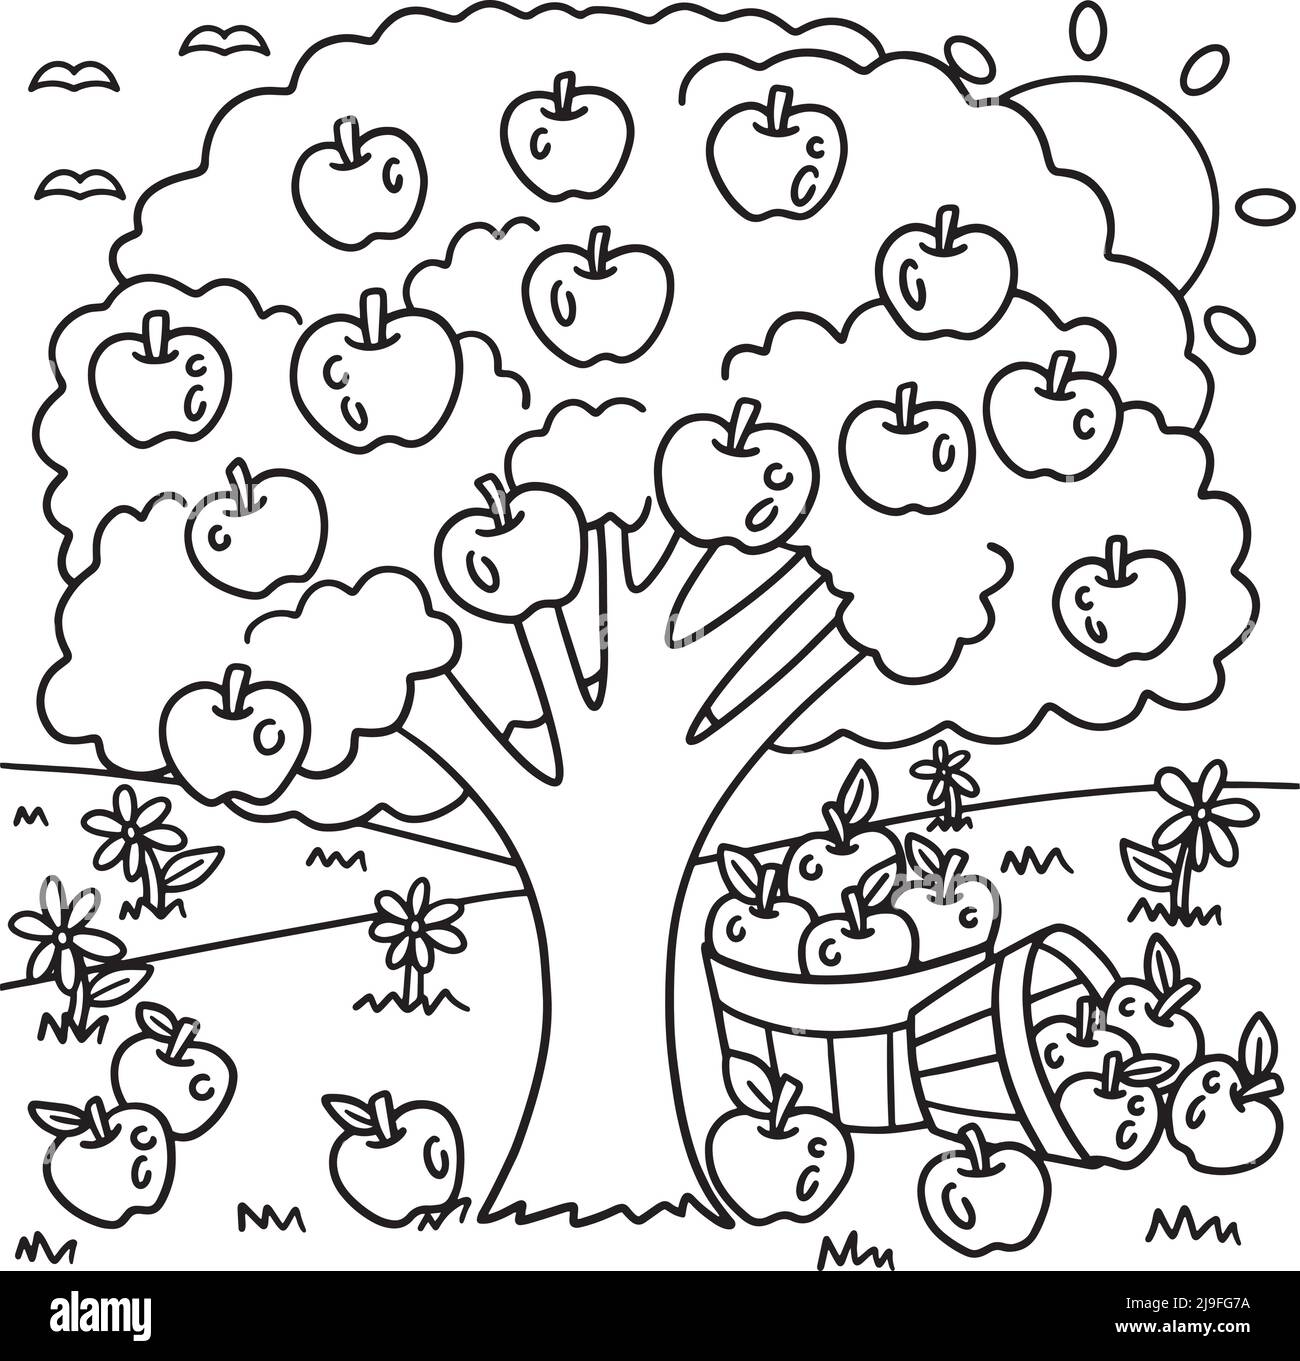 Apple Tree Coloring Page for Kids Stock Vector